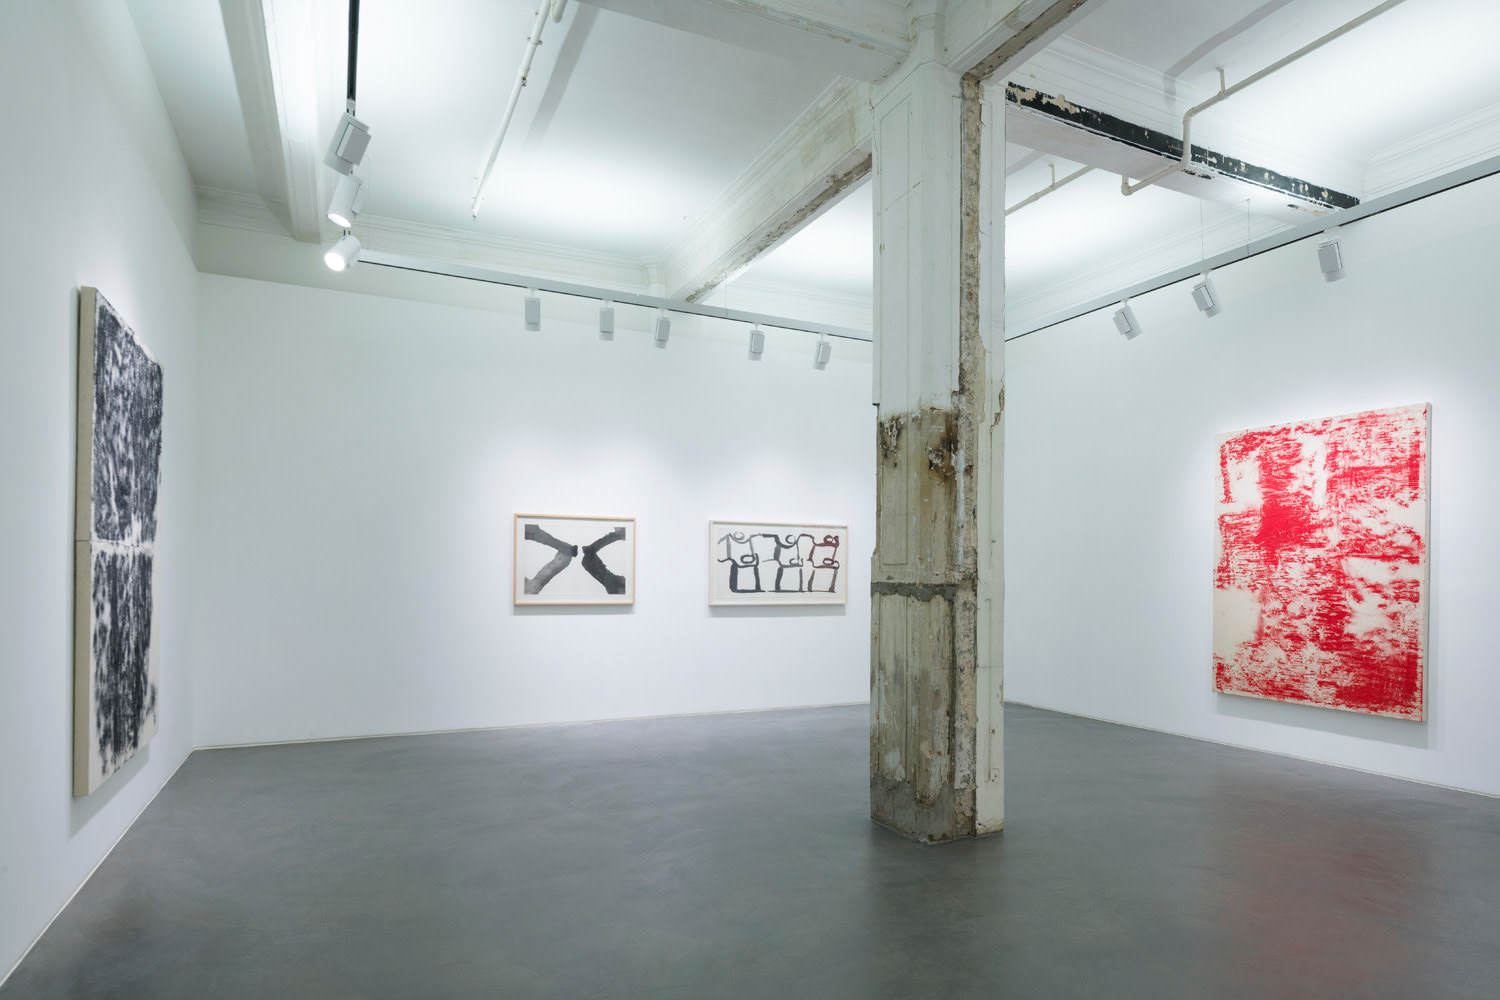 Eleventh installation view of the group exhibition be/longing at Lehmann Maupin Hong Kong